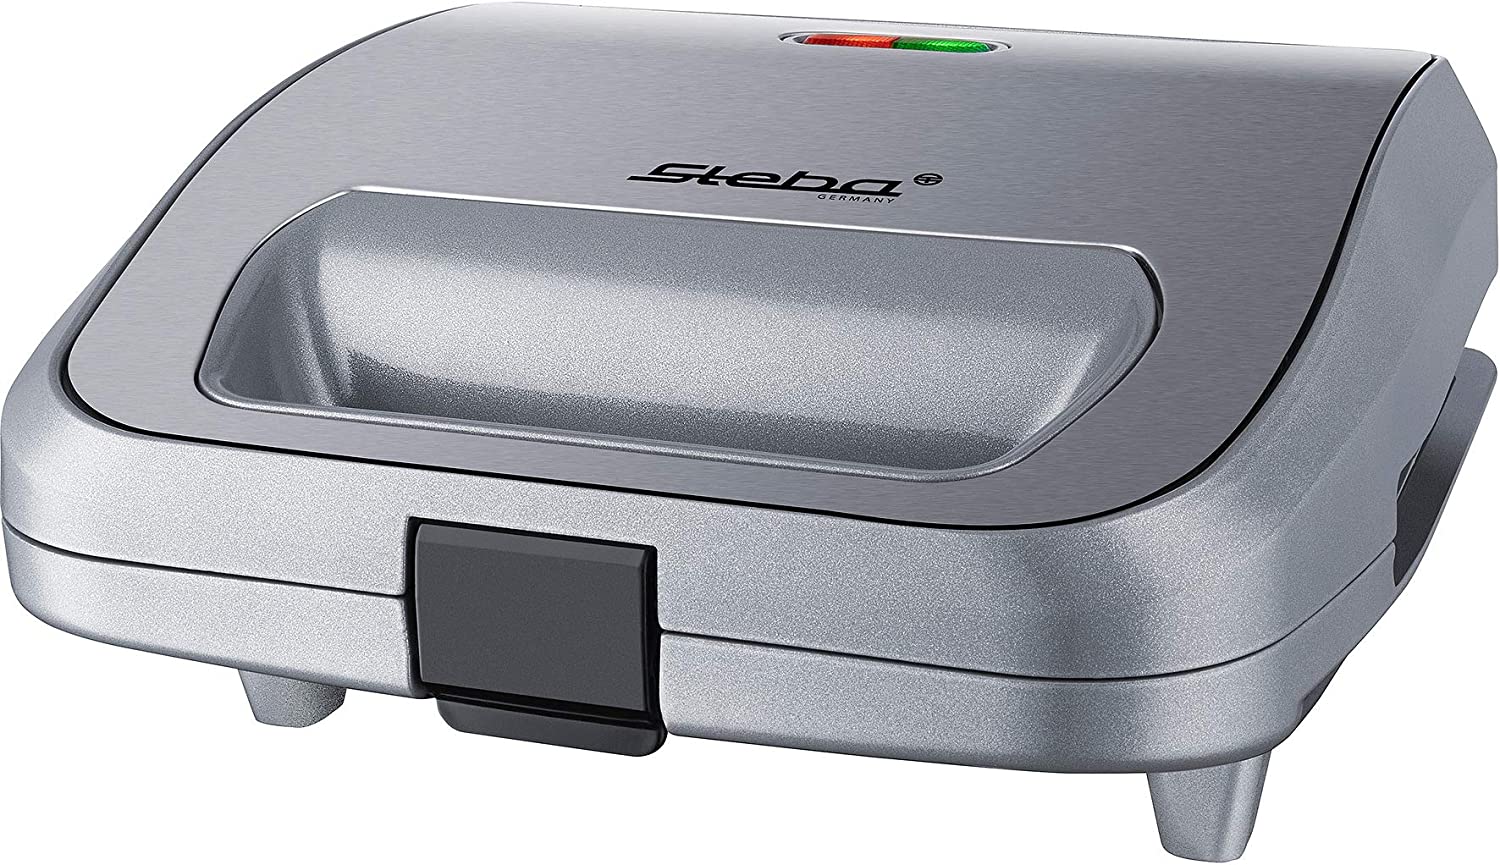 Steba 18-64-00 SG 65 Sandwich Maker, Set of 3, Non-Stick Coated Plates can be easily removed at the touch of a button, 750 W, Grey/Stainless Steel, Plastic